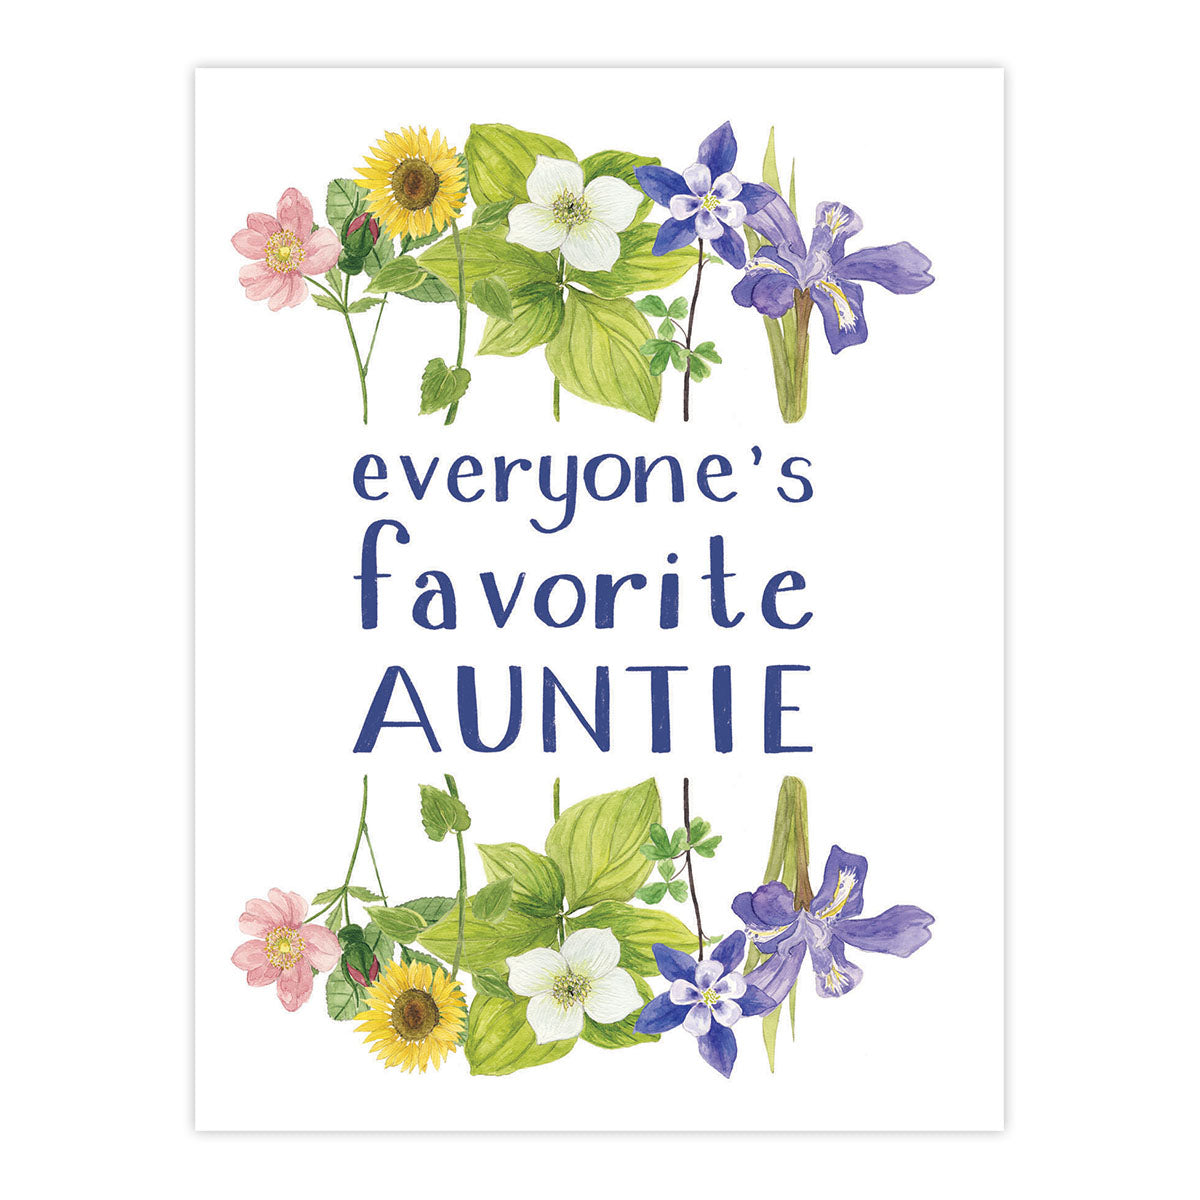 Everyone's Favorite Auntie Card - Mother's Day Card